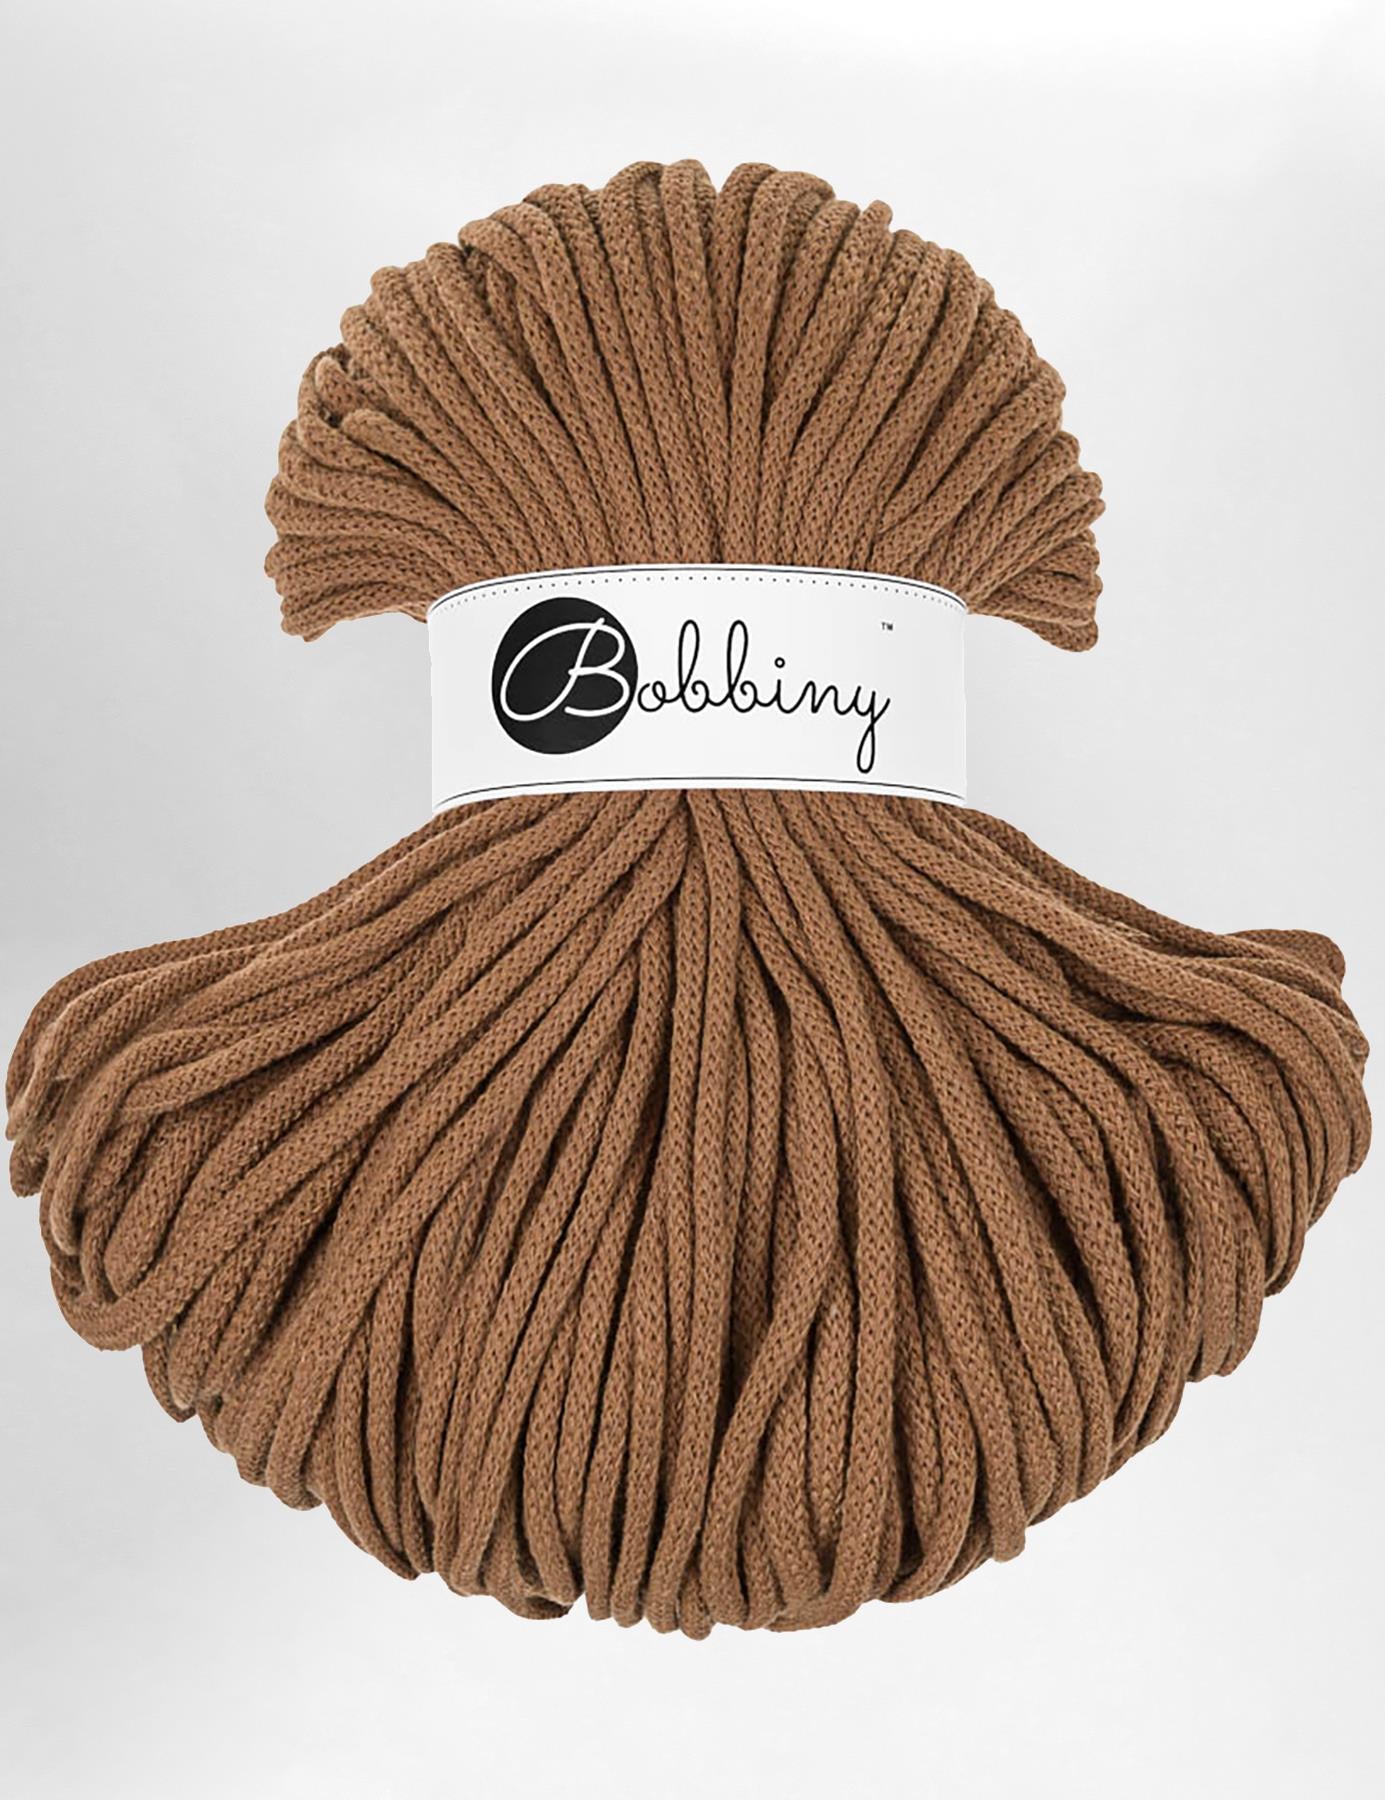 5mm Caramel recycled cotton macrame cord by Bobbiny (100m)